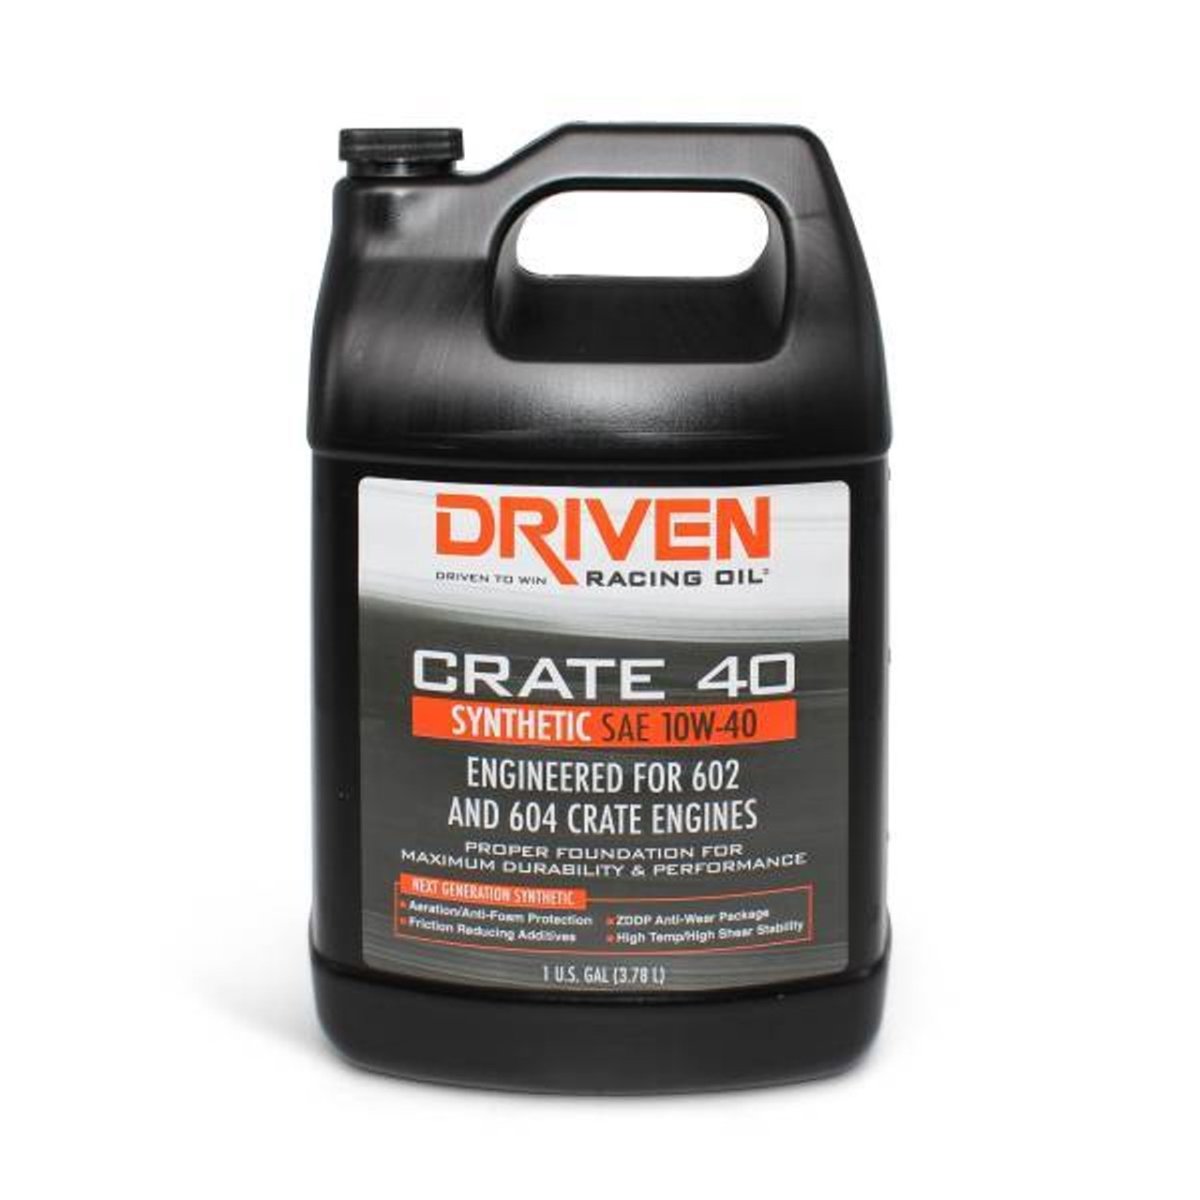 Picture of Driven Racing Oil JGP22408 Crate 40 10W40 Synthetic Motor Oil - 1 gal